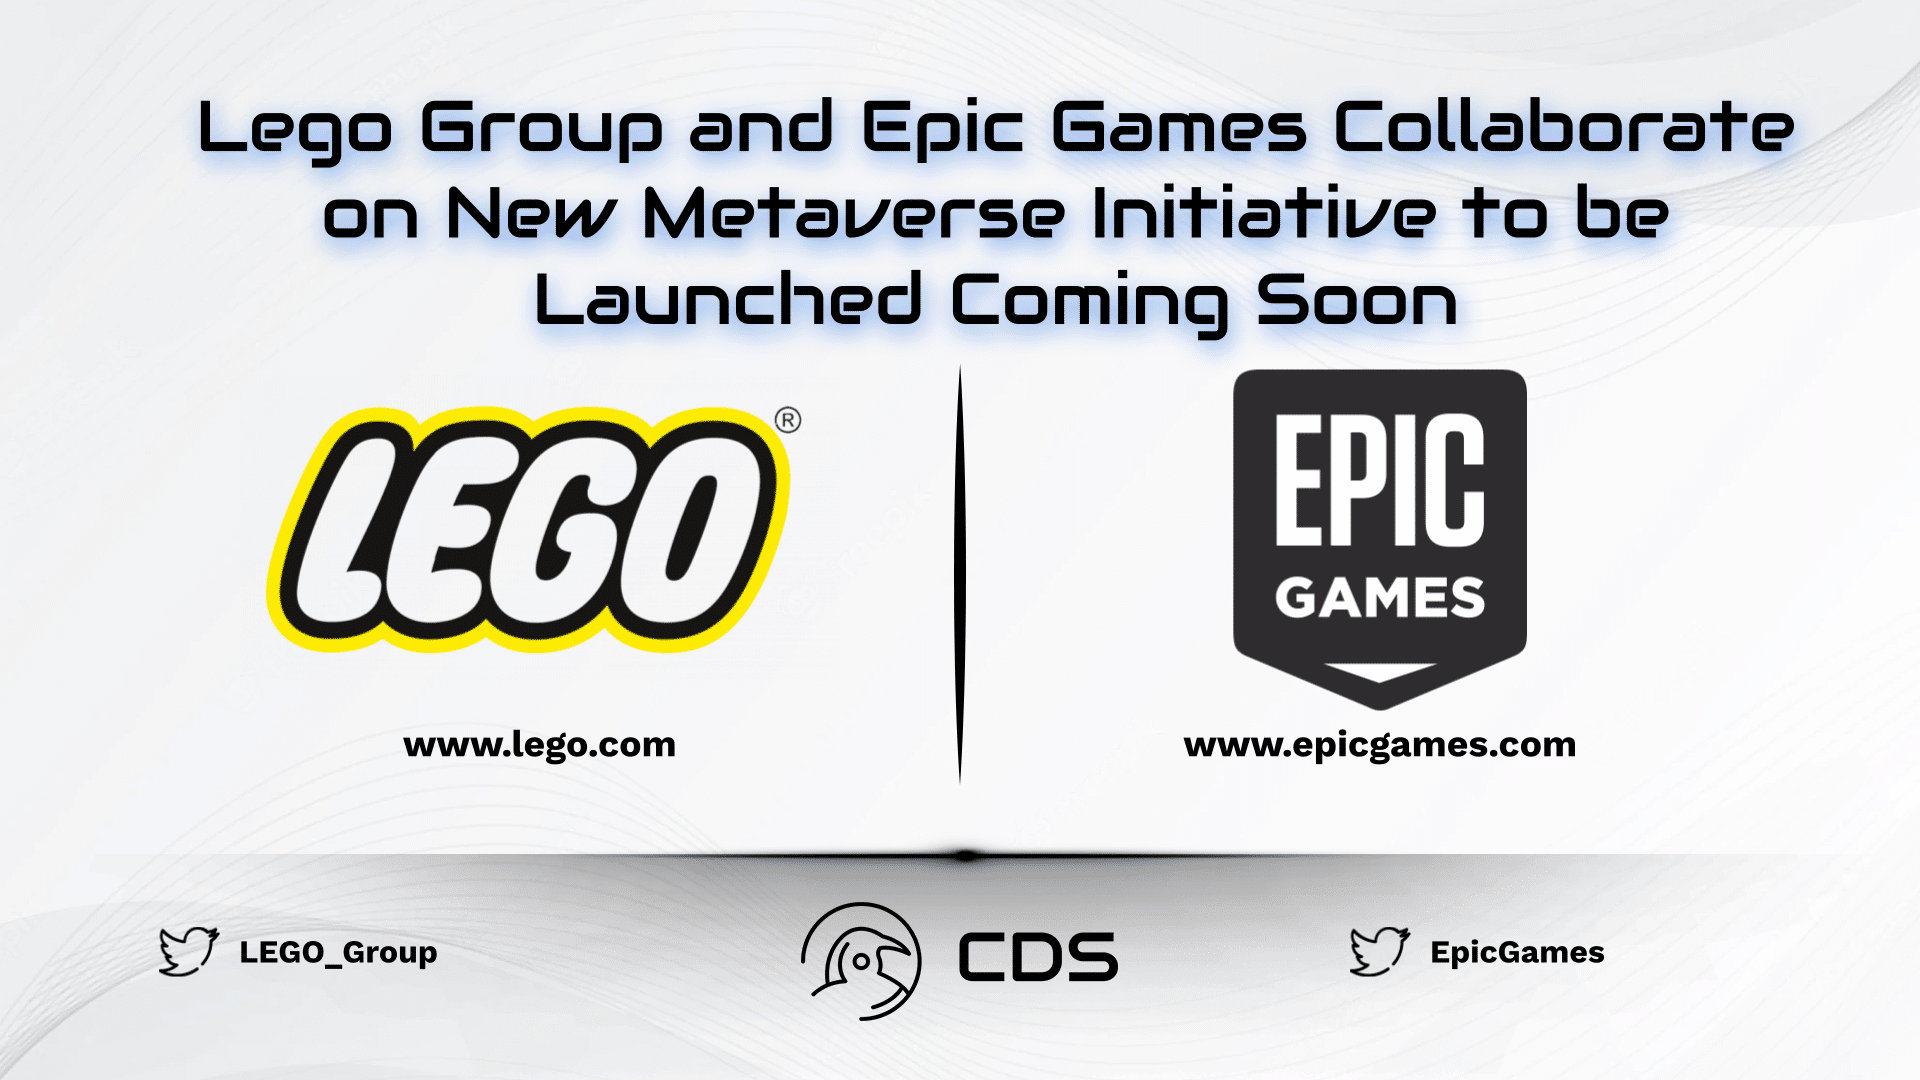 Lego Group and Epic Games Collaborate on New Metaverse Initiative to be Launched Coming Soon